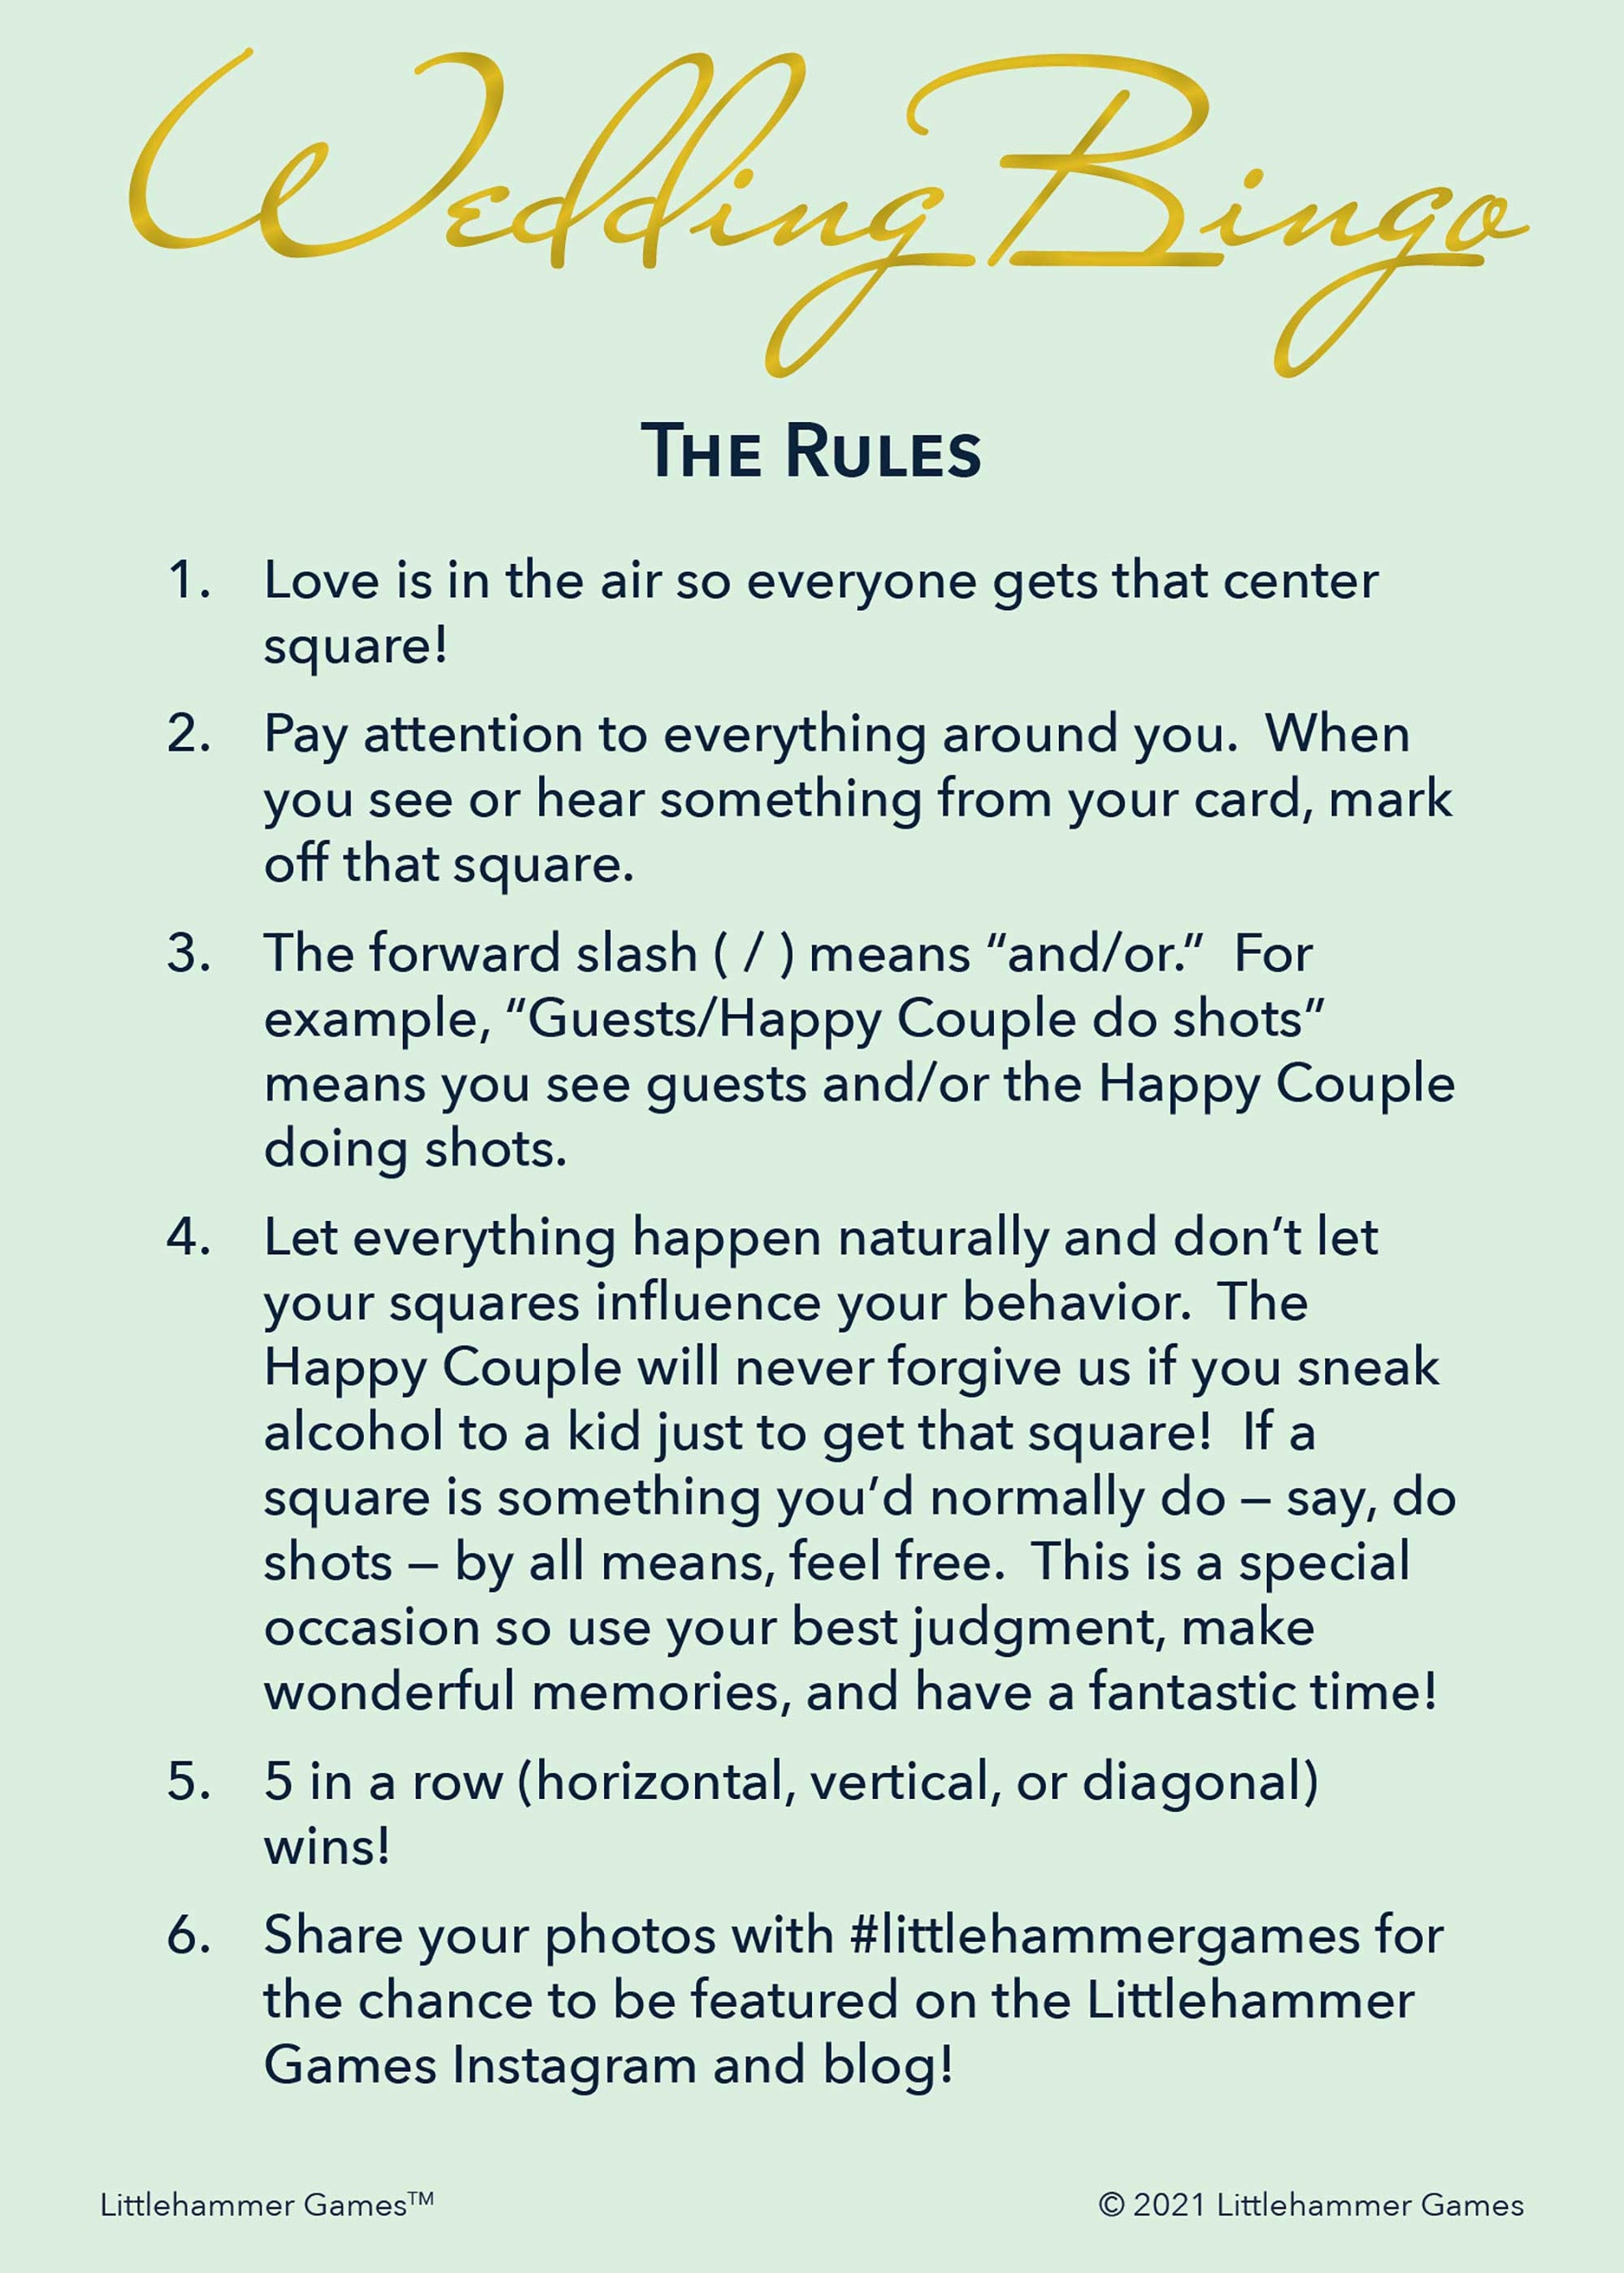 Wedding Bingo rules card on a mint and gold background